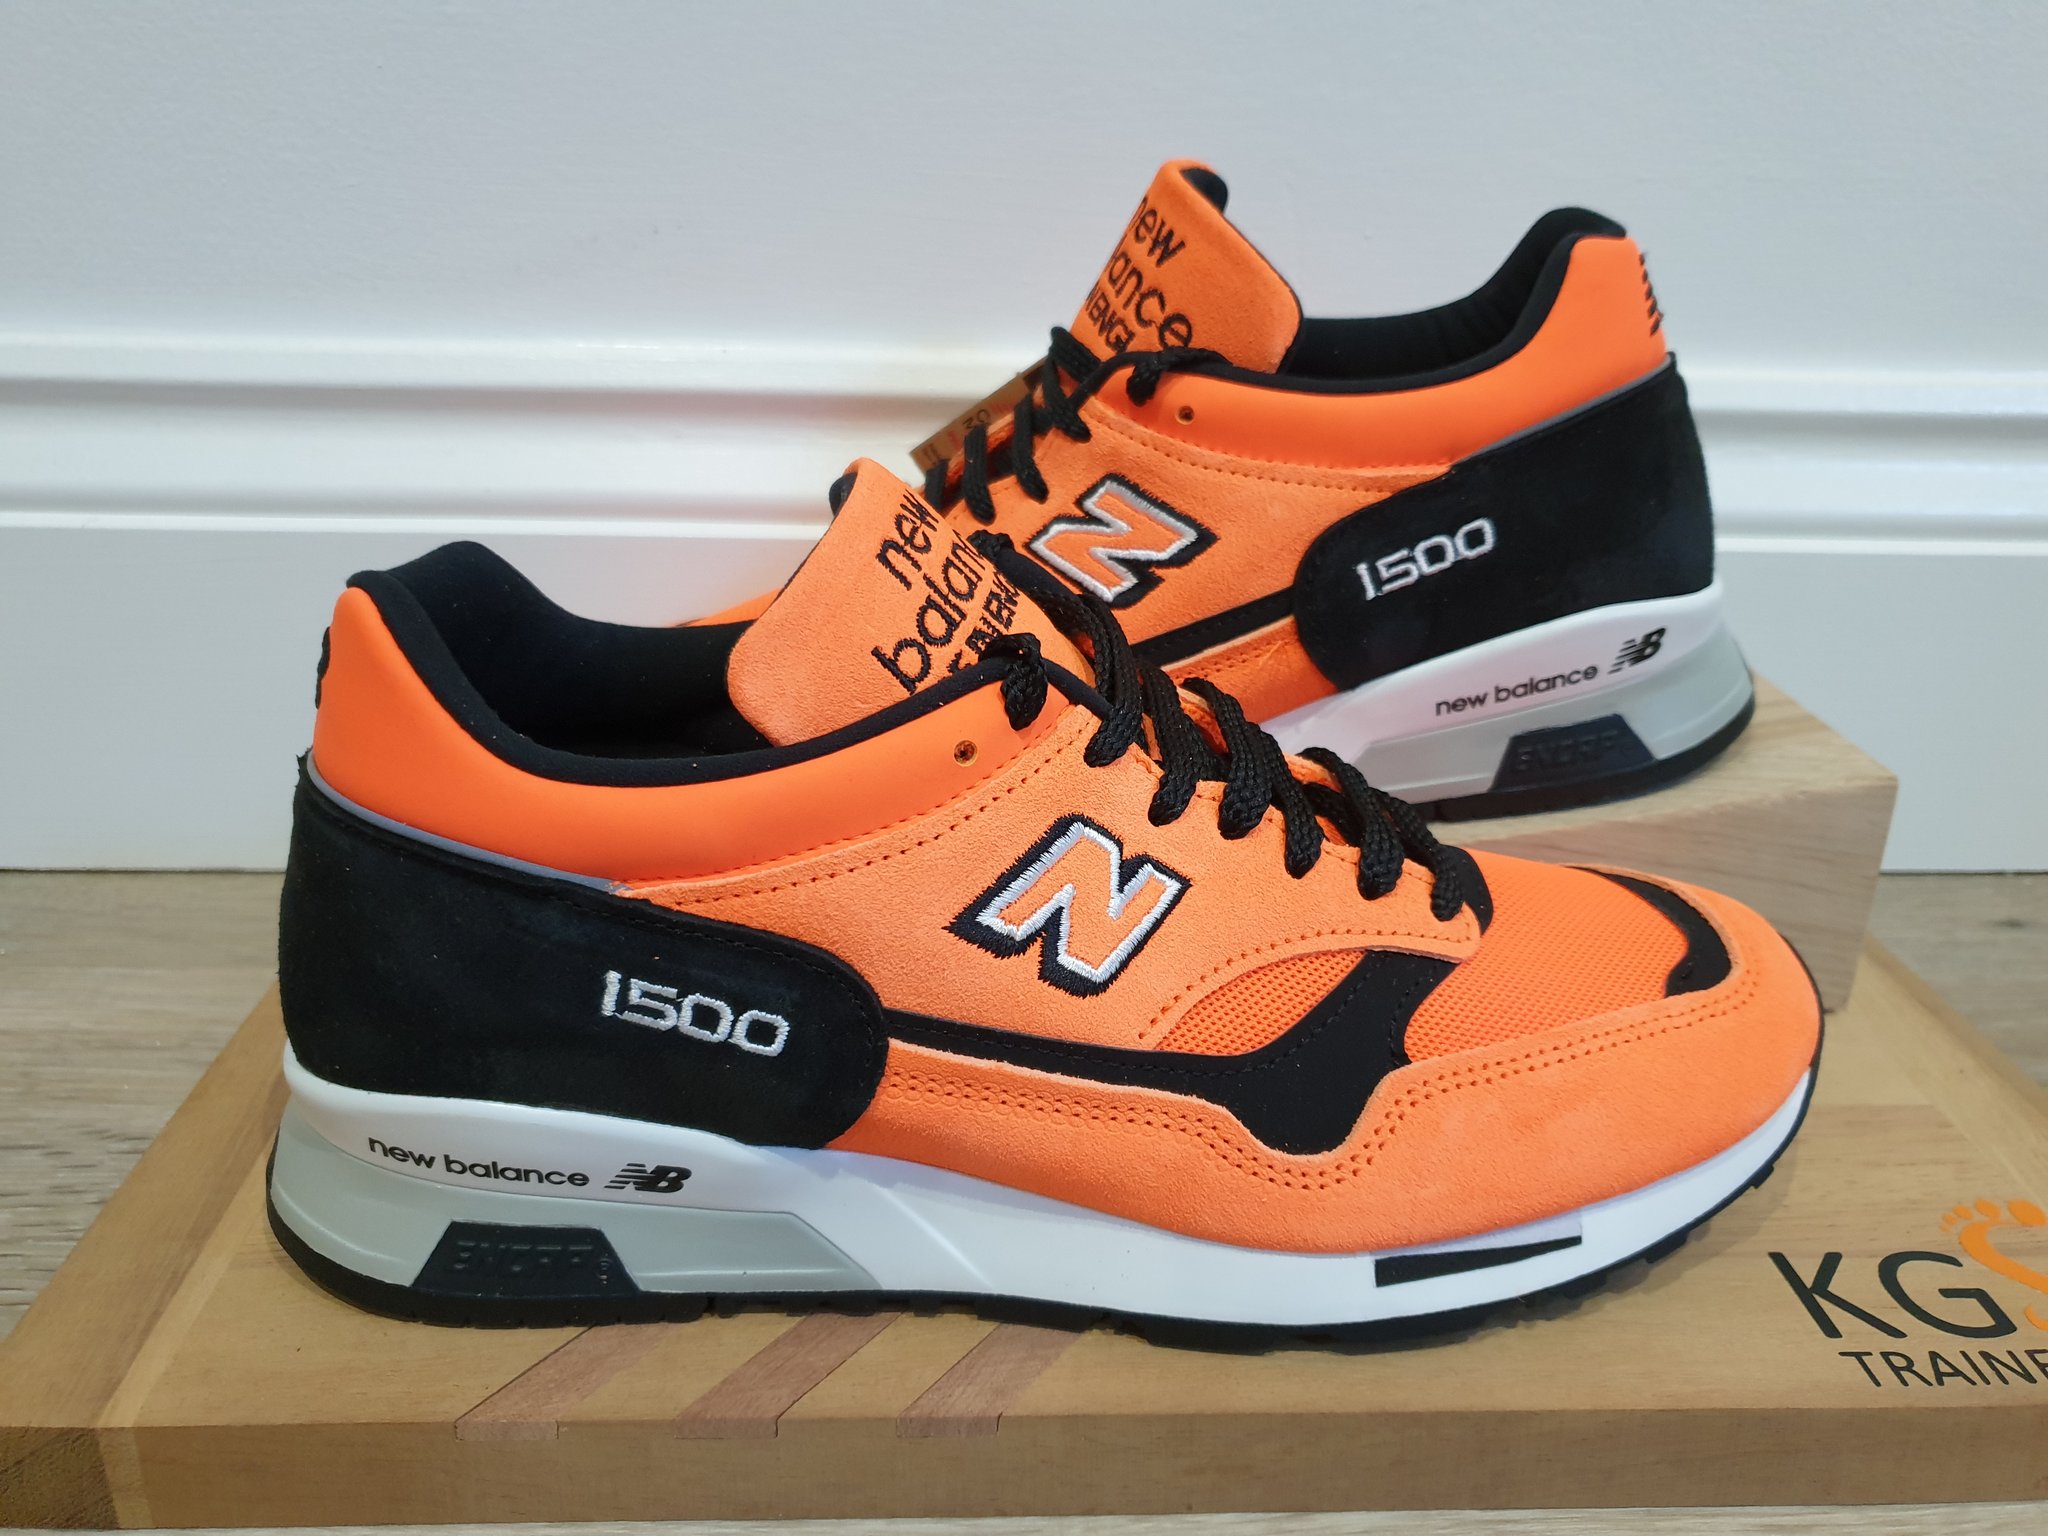 pigeon Algebra Me KGS Trainers on Twitter: "New balance M1500 made in England Neon  orange/black Sizes 7 &amp; 7.5 UK BNIBWT £100 delivered. Add 4% if paying  PayPal G&amp;S Dm to purchase #newbalance #madeinengland #runners #